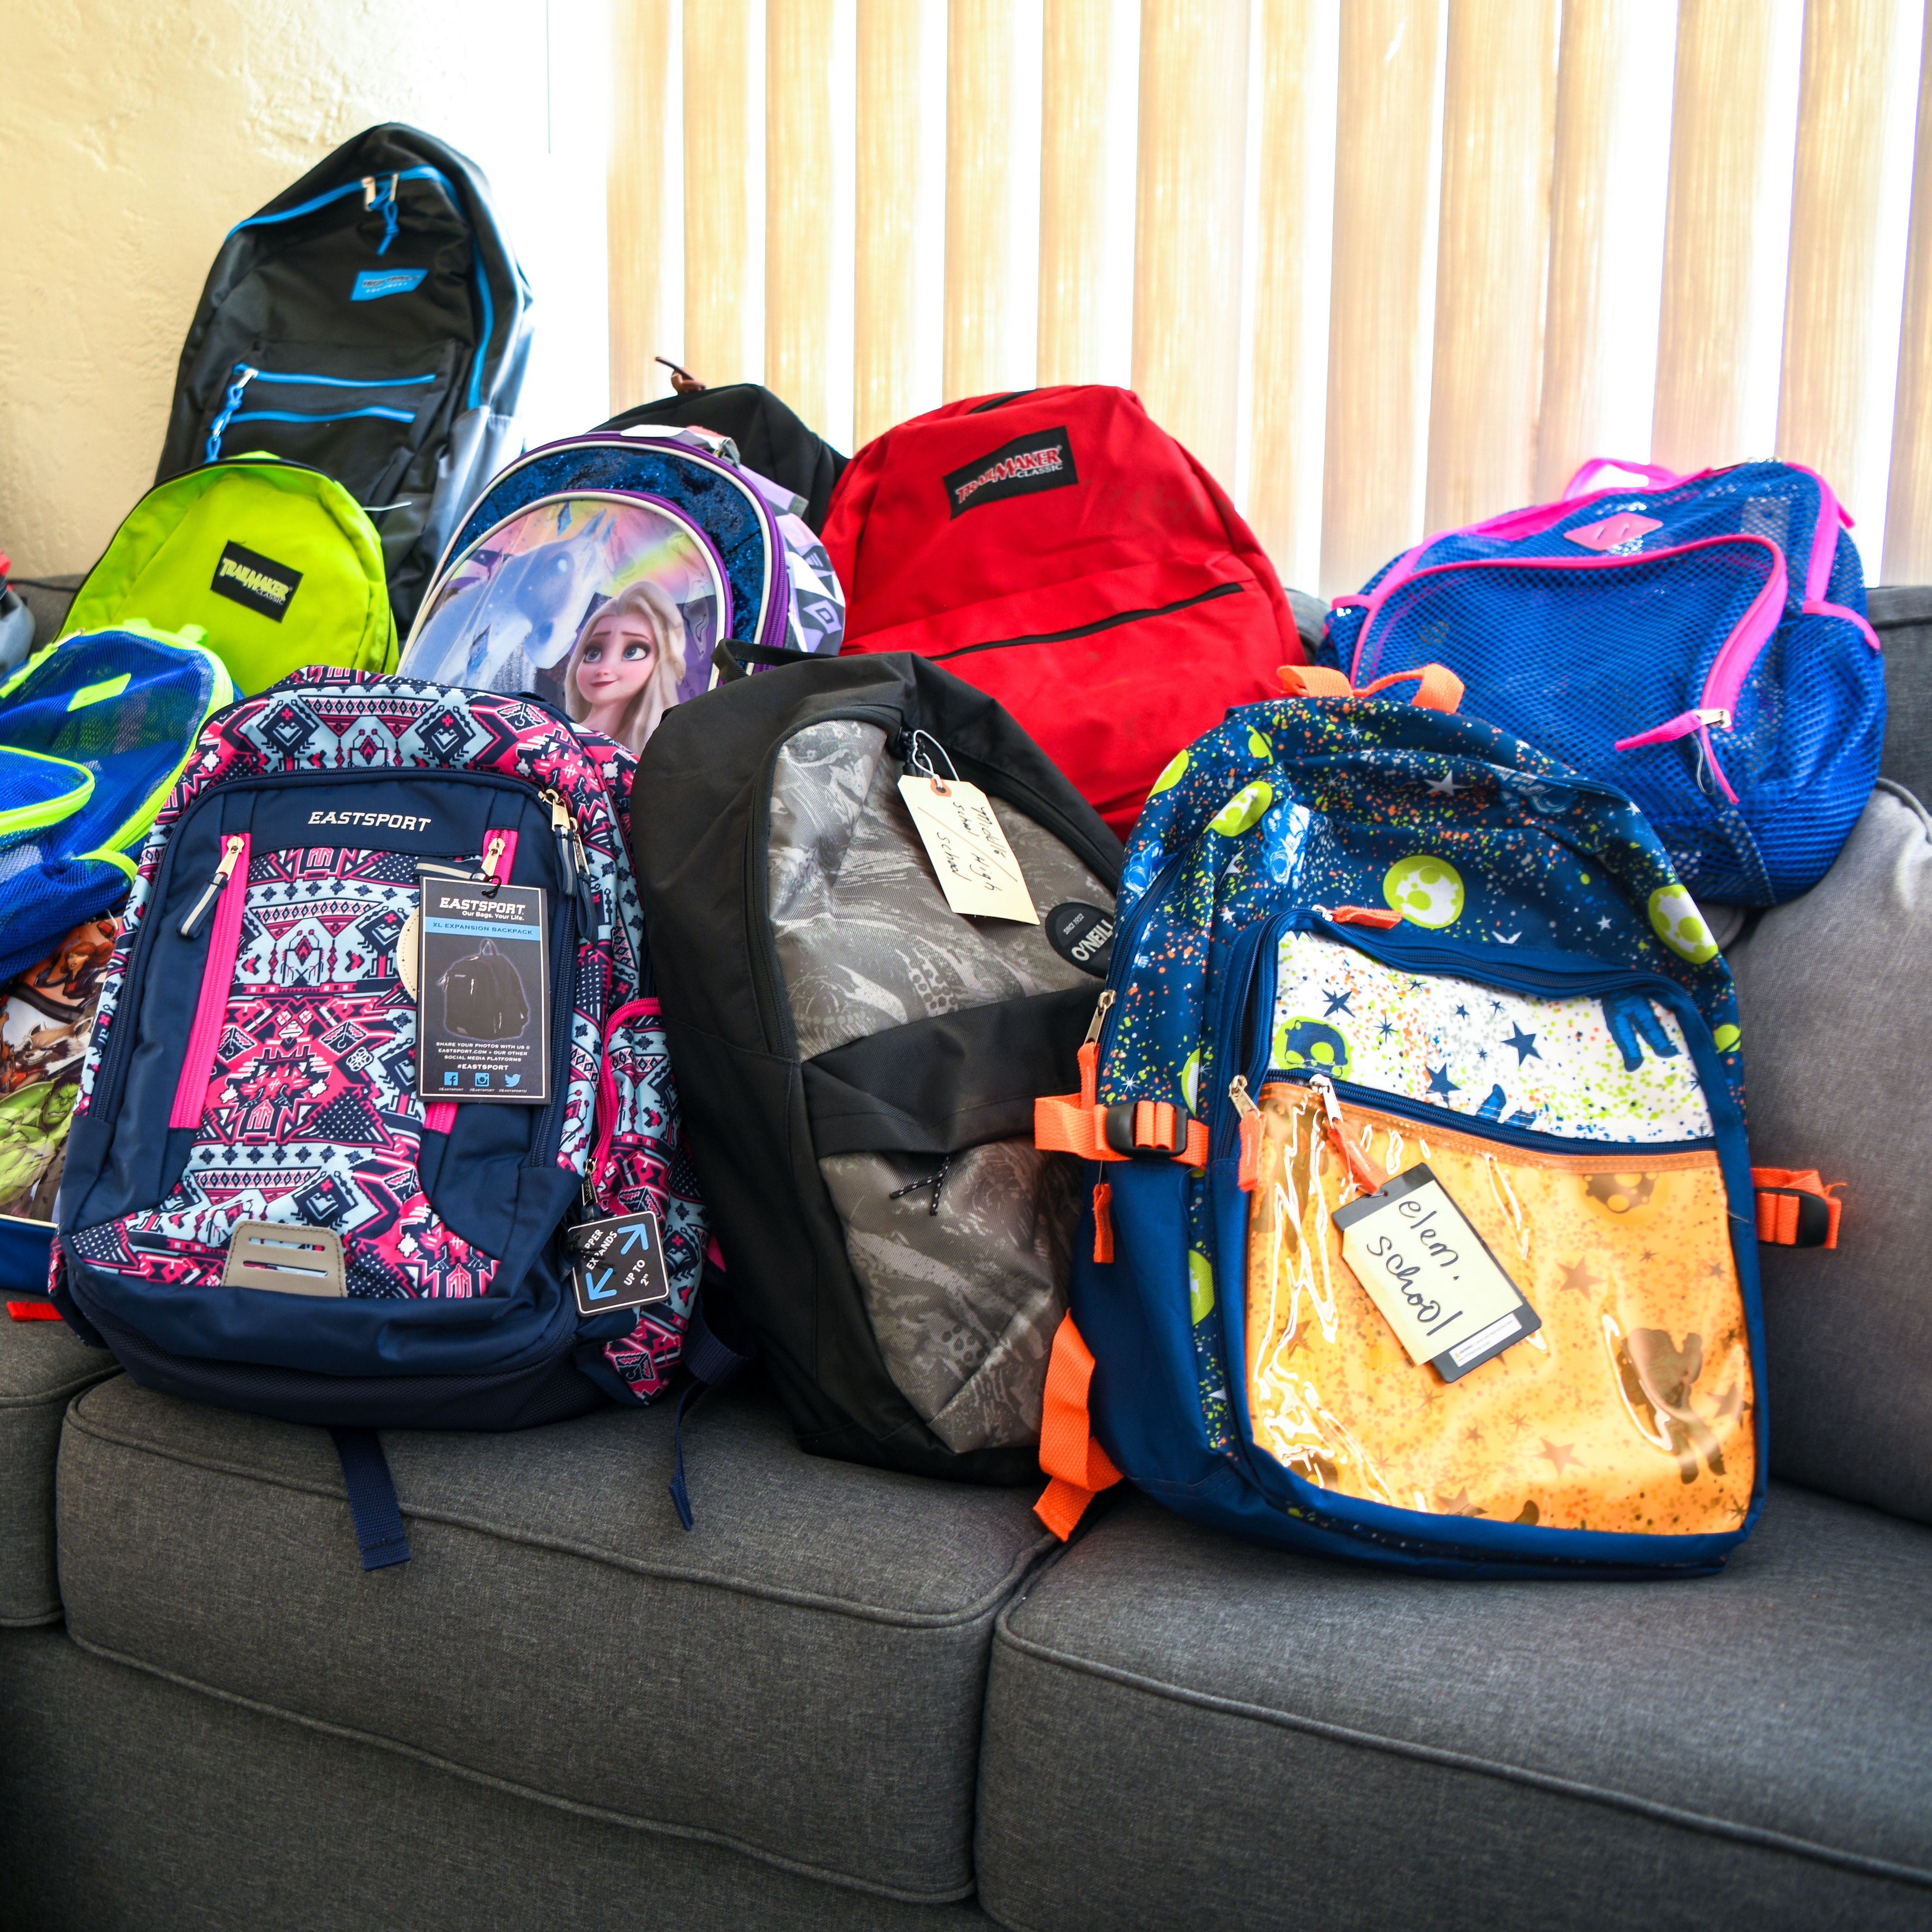 Backpacks donated by PICO